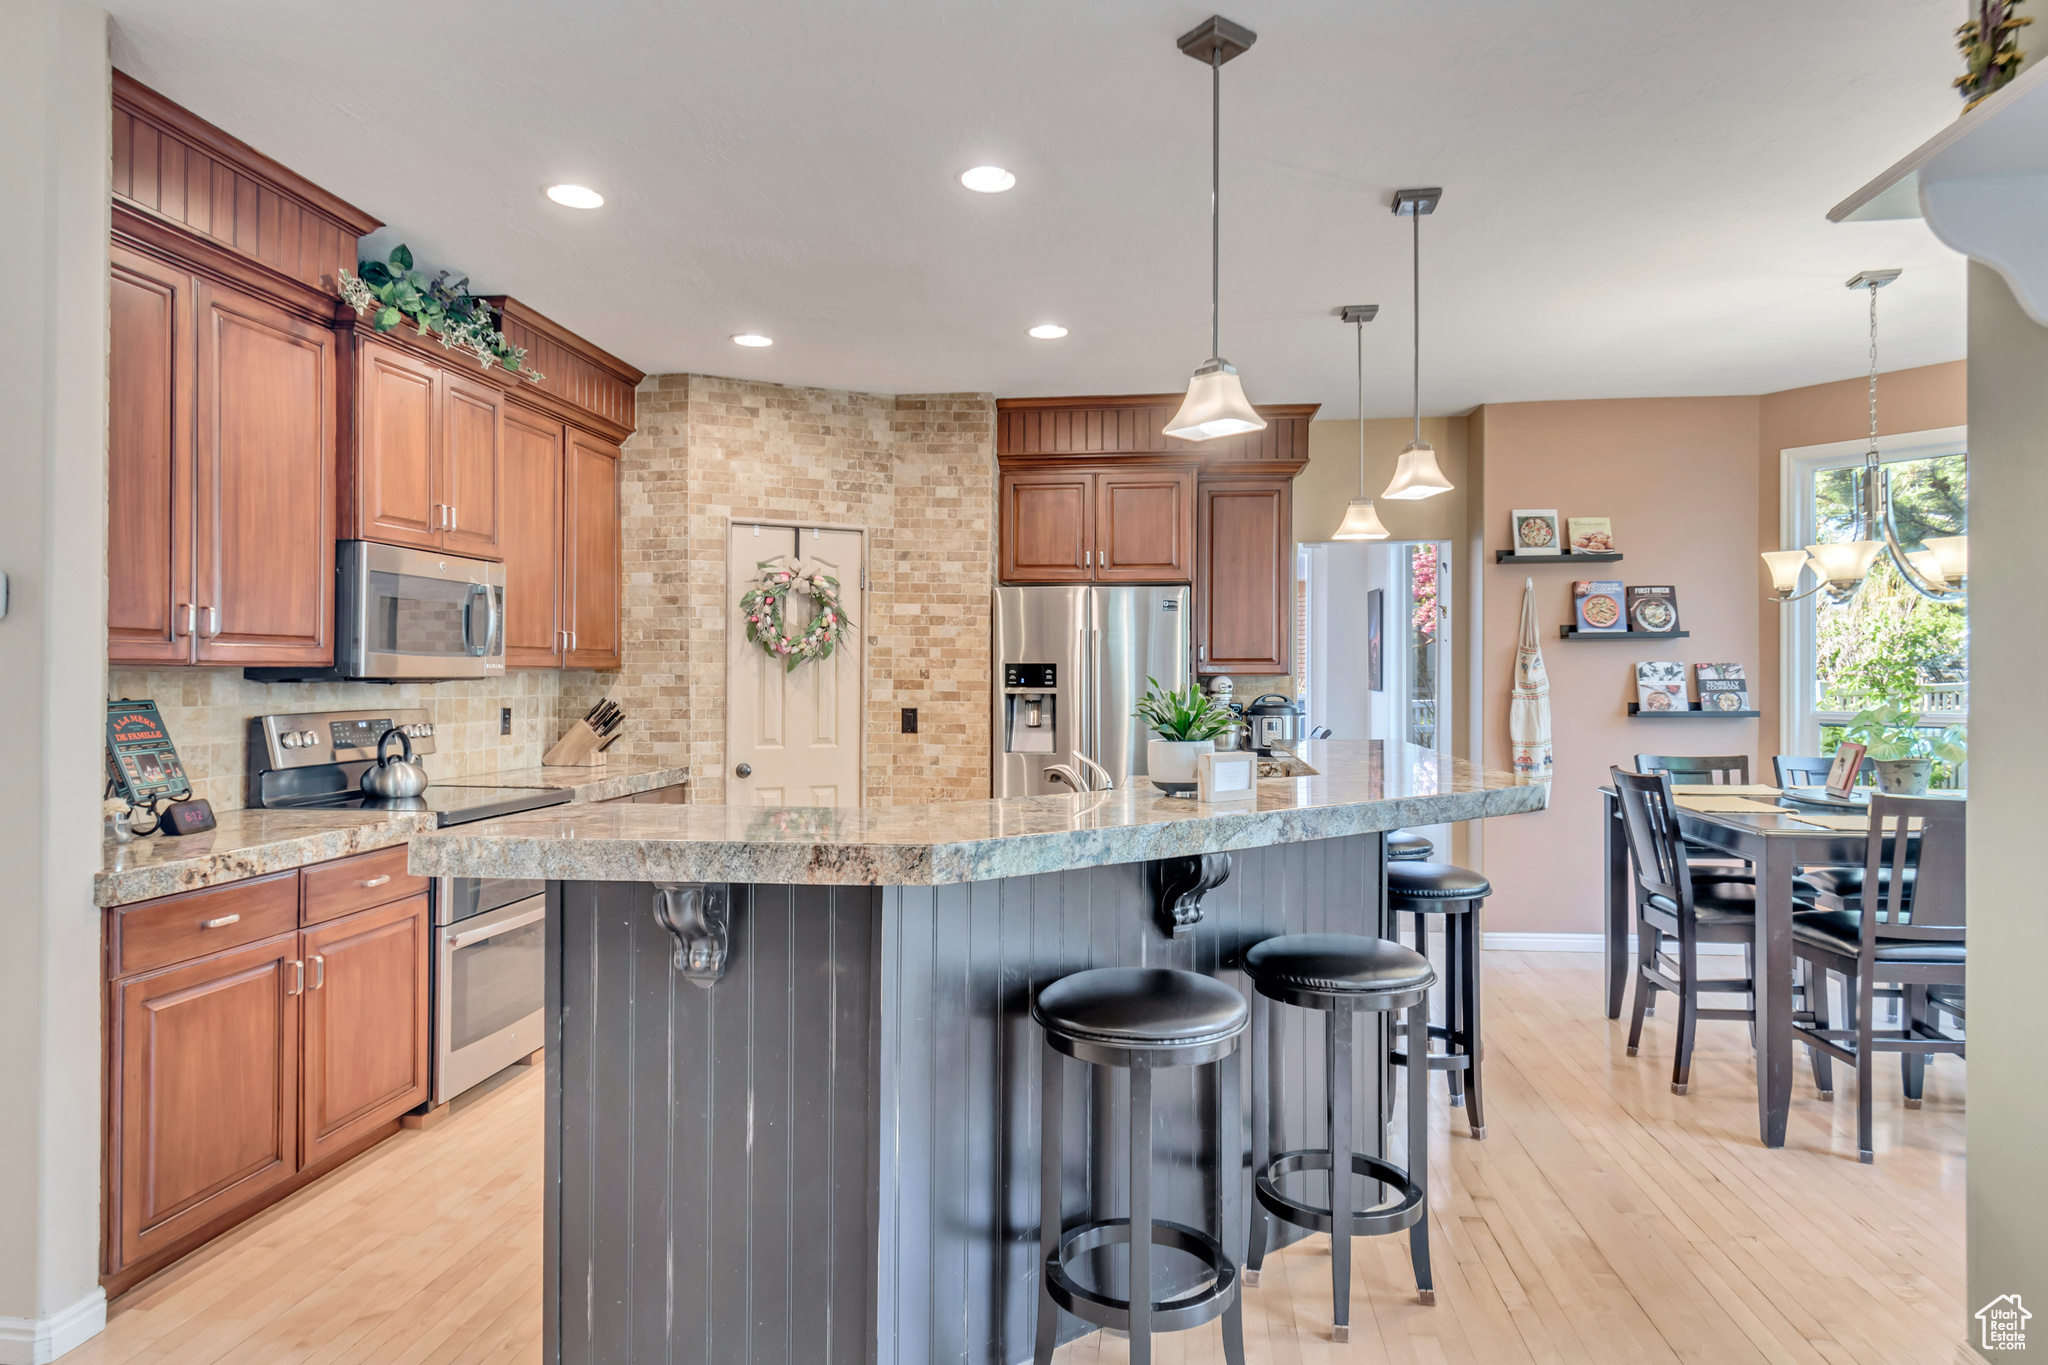 Kitchen with pendant lighting, appliances with stainless steel finishes, light hardwood / wood-style flooring, and a breakfast bar area